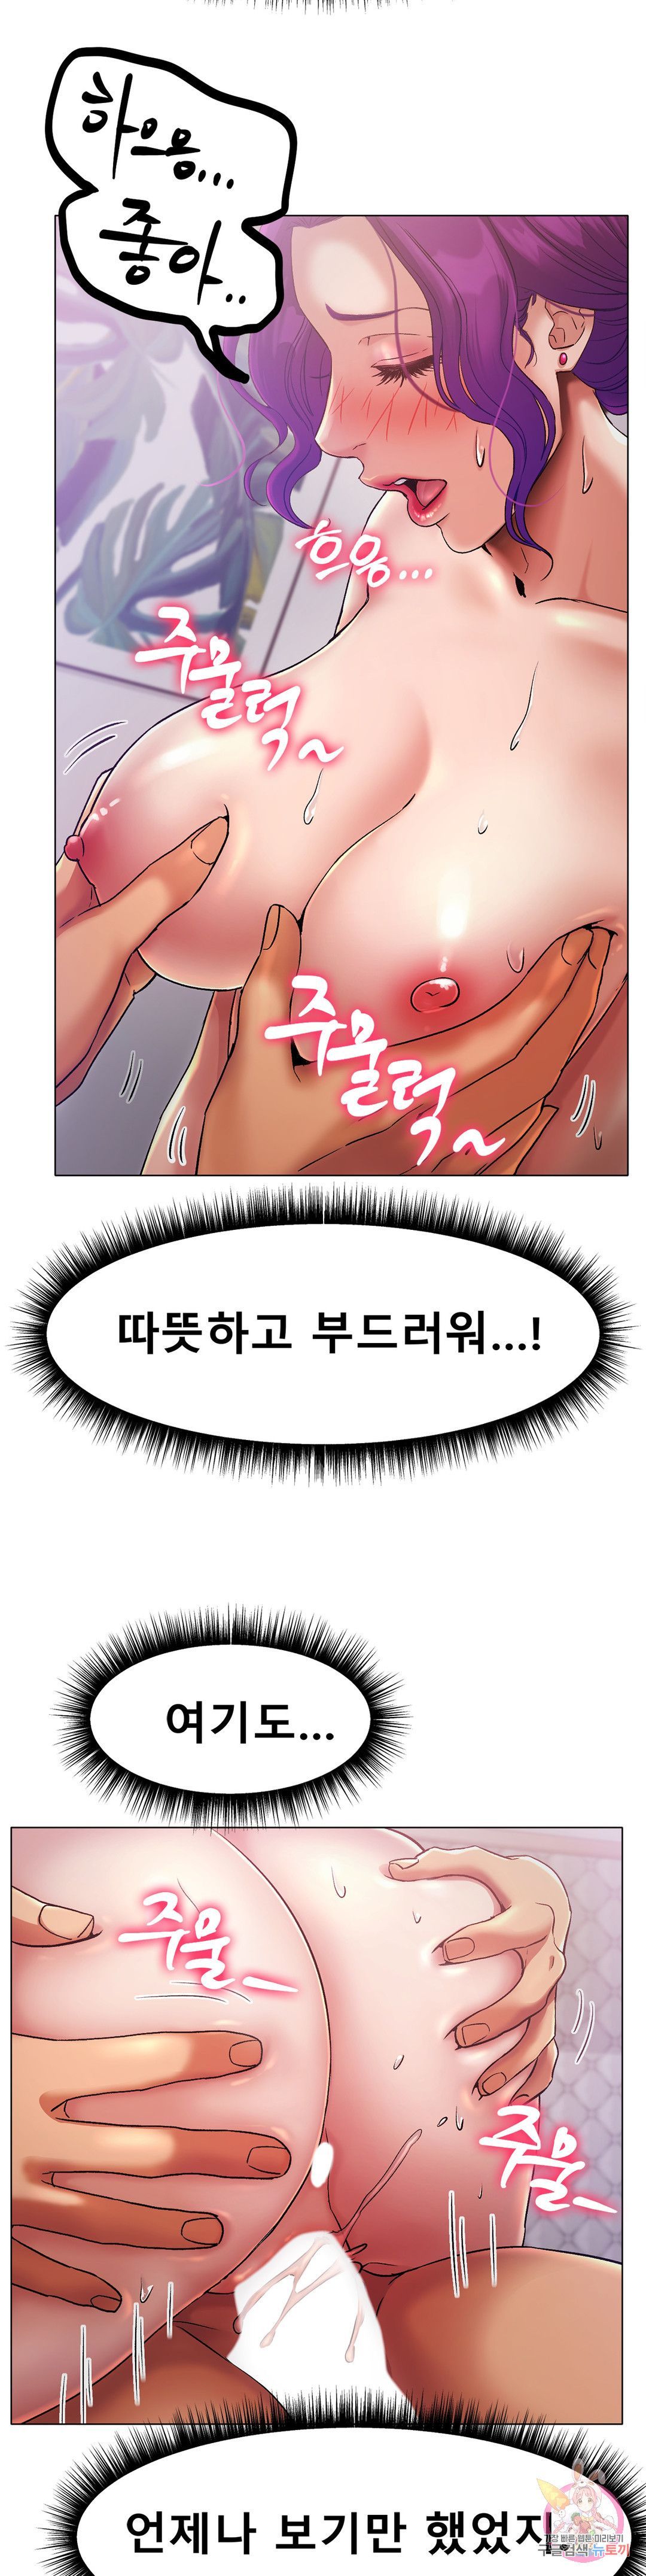 Icelove Raw - Chapter 2 Page 5